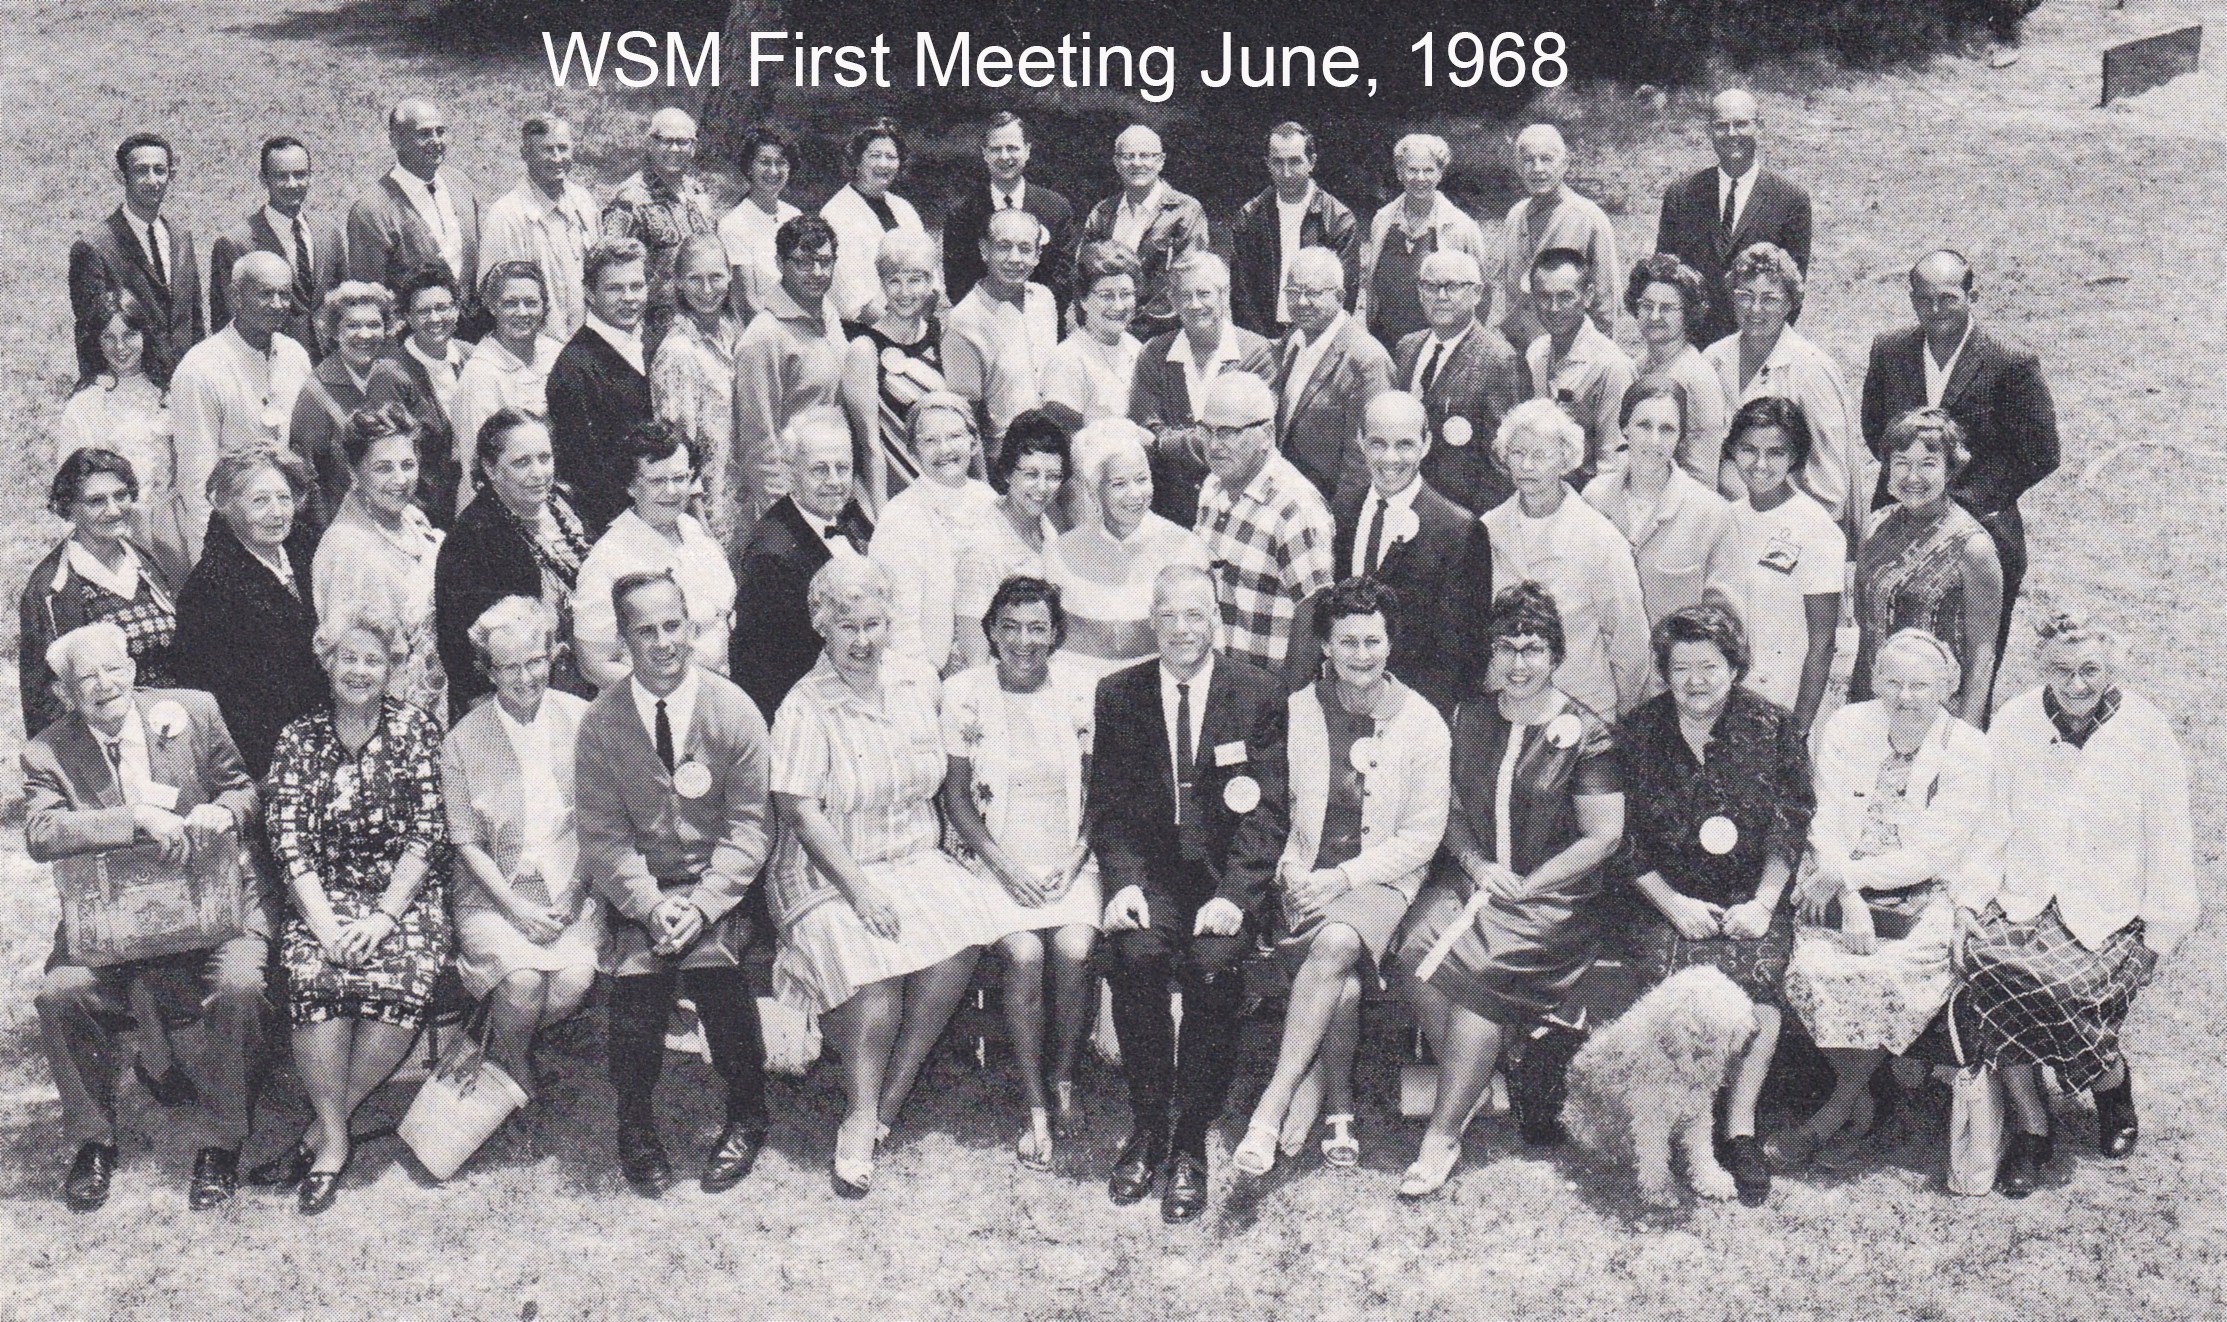 Group Photo WSM June 1968 First Annual Meeting The Echo 1 p16